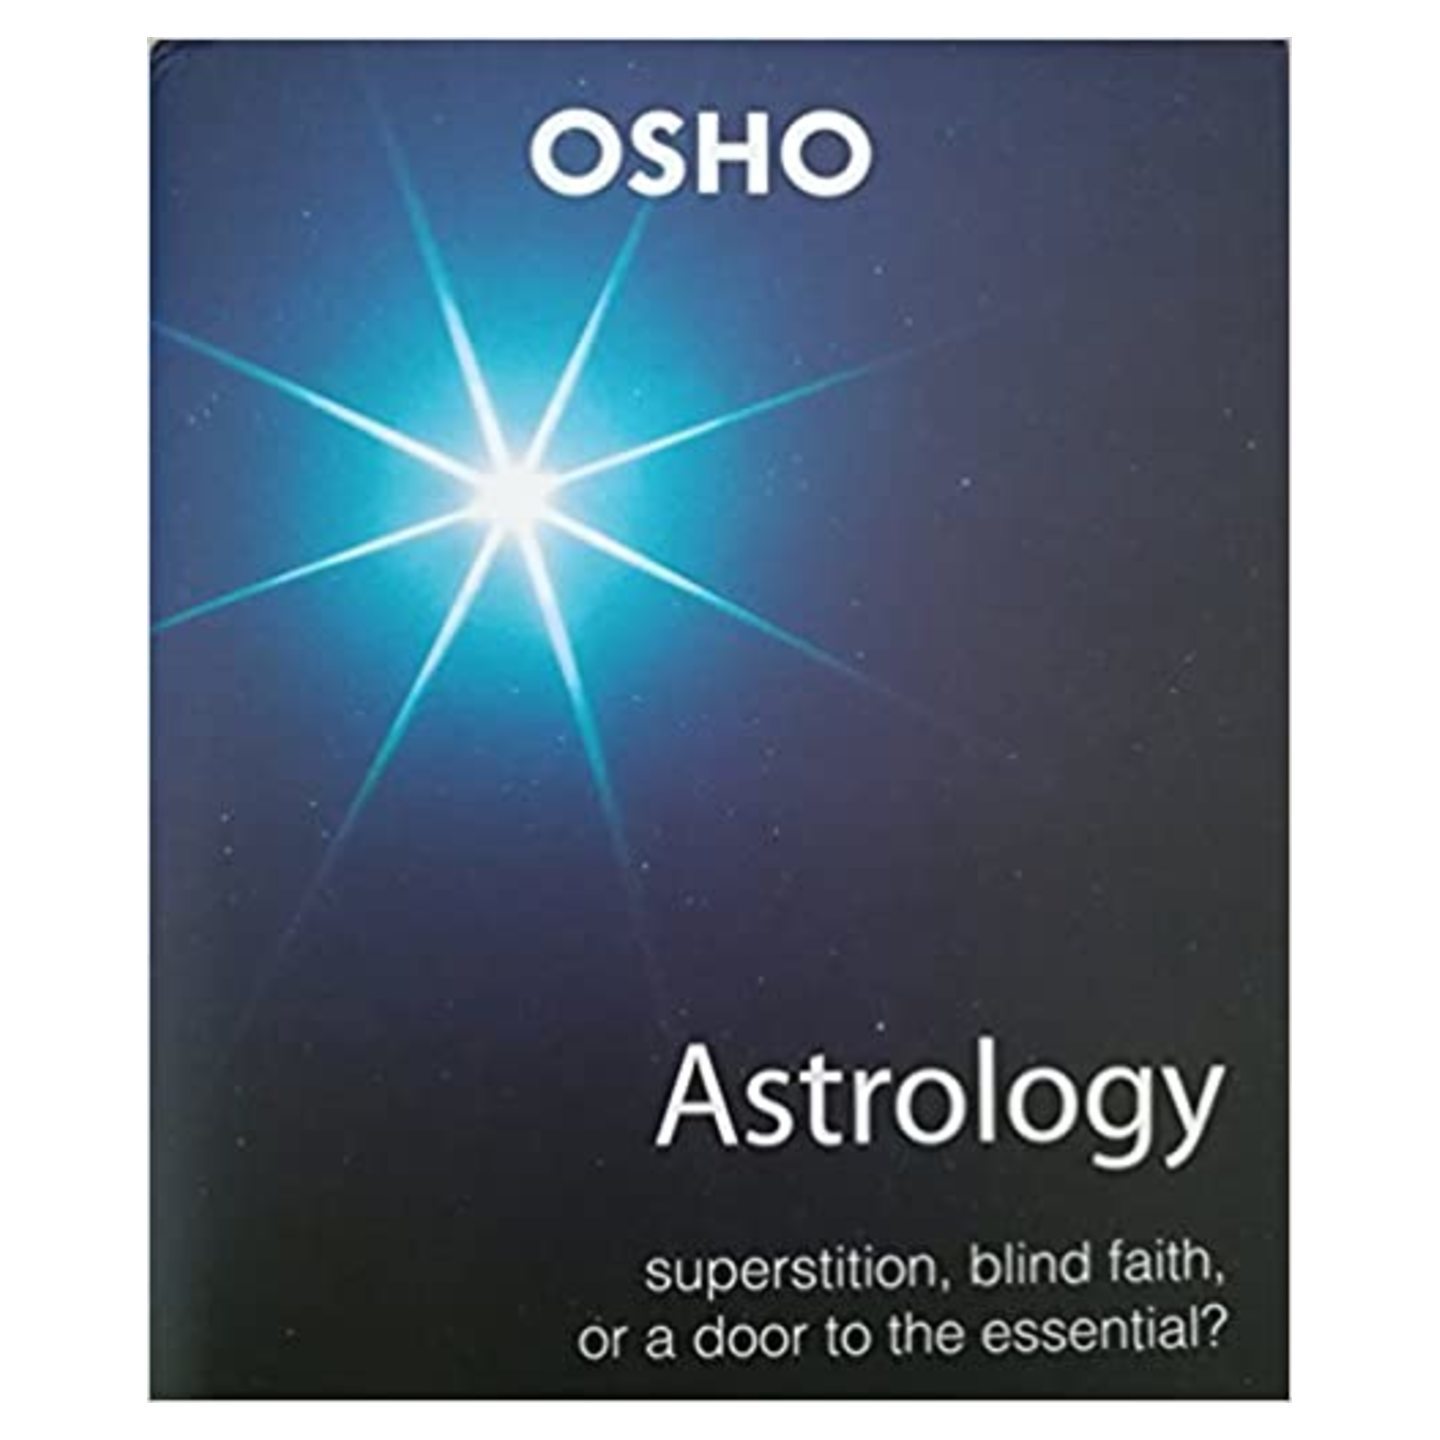 Astrology Superstition, Blind Faith or a Door to the Essential